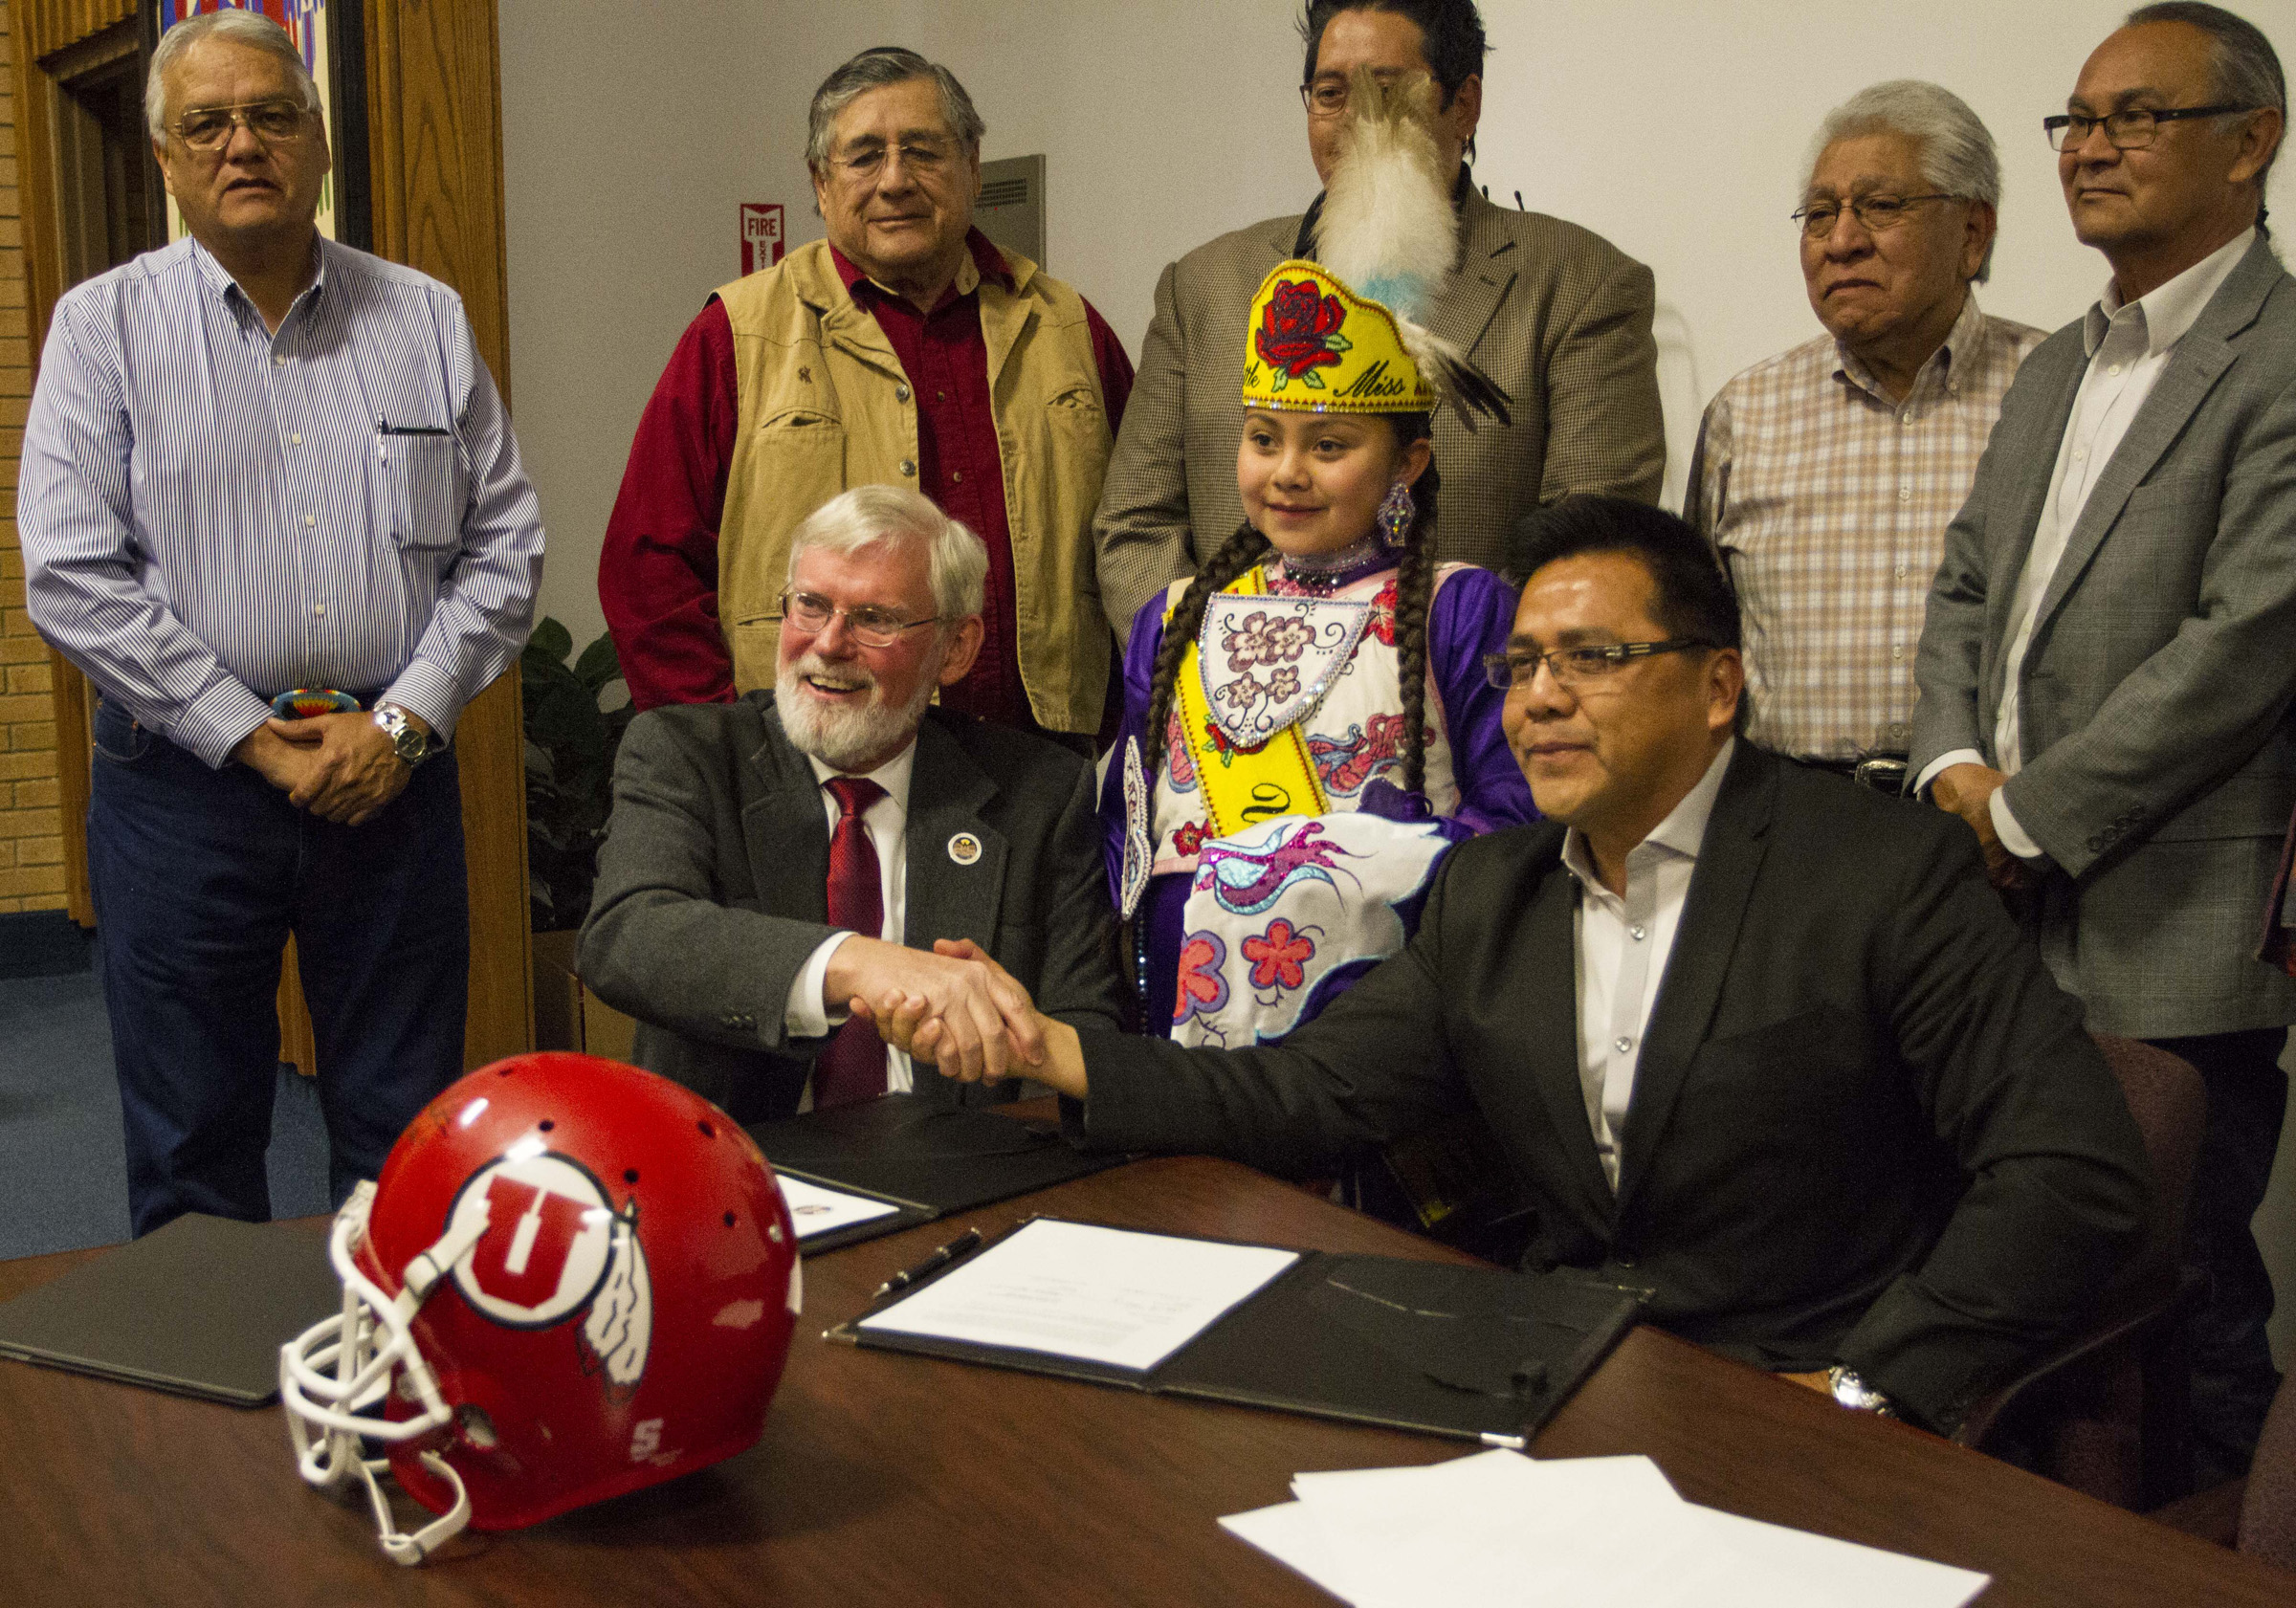 Left to Right President Pershing and Chairmen Gordon Howell, and members of the Ute Indian Tribe Business Committee shake hands after the signing of the Memoradium of Understanding at the Ute Indian Tribe Headquaters in Fort Duchesne, Utah.